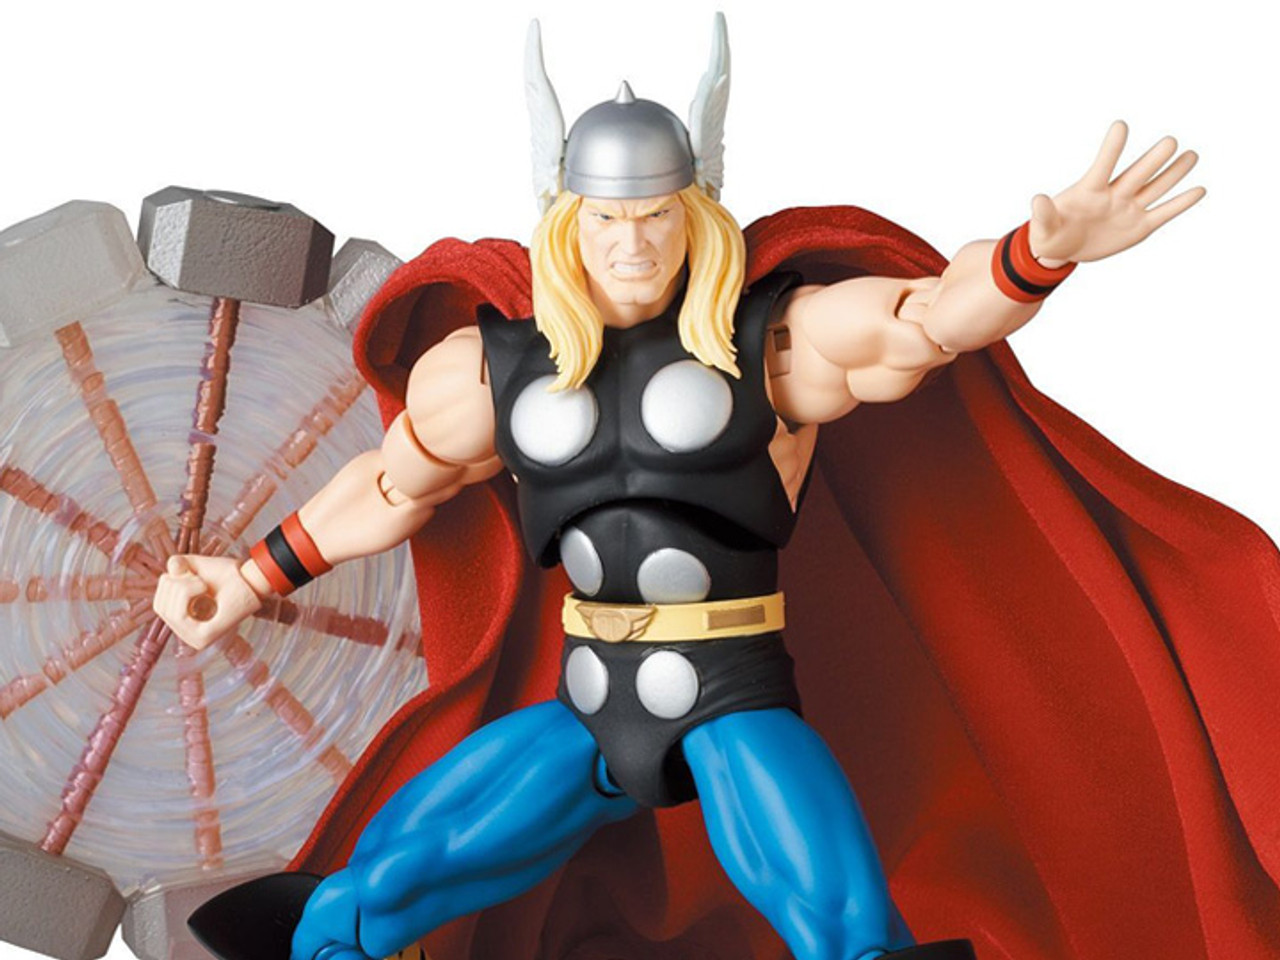 Marvel MAFEX No. 182 Thor (Comic Ver.) - Mike's Toys and Stuff!